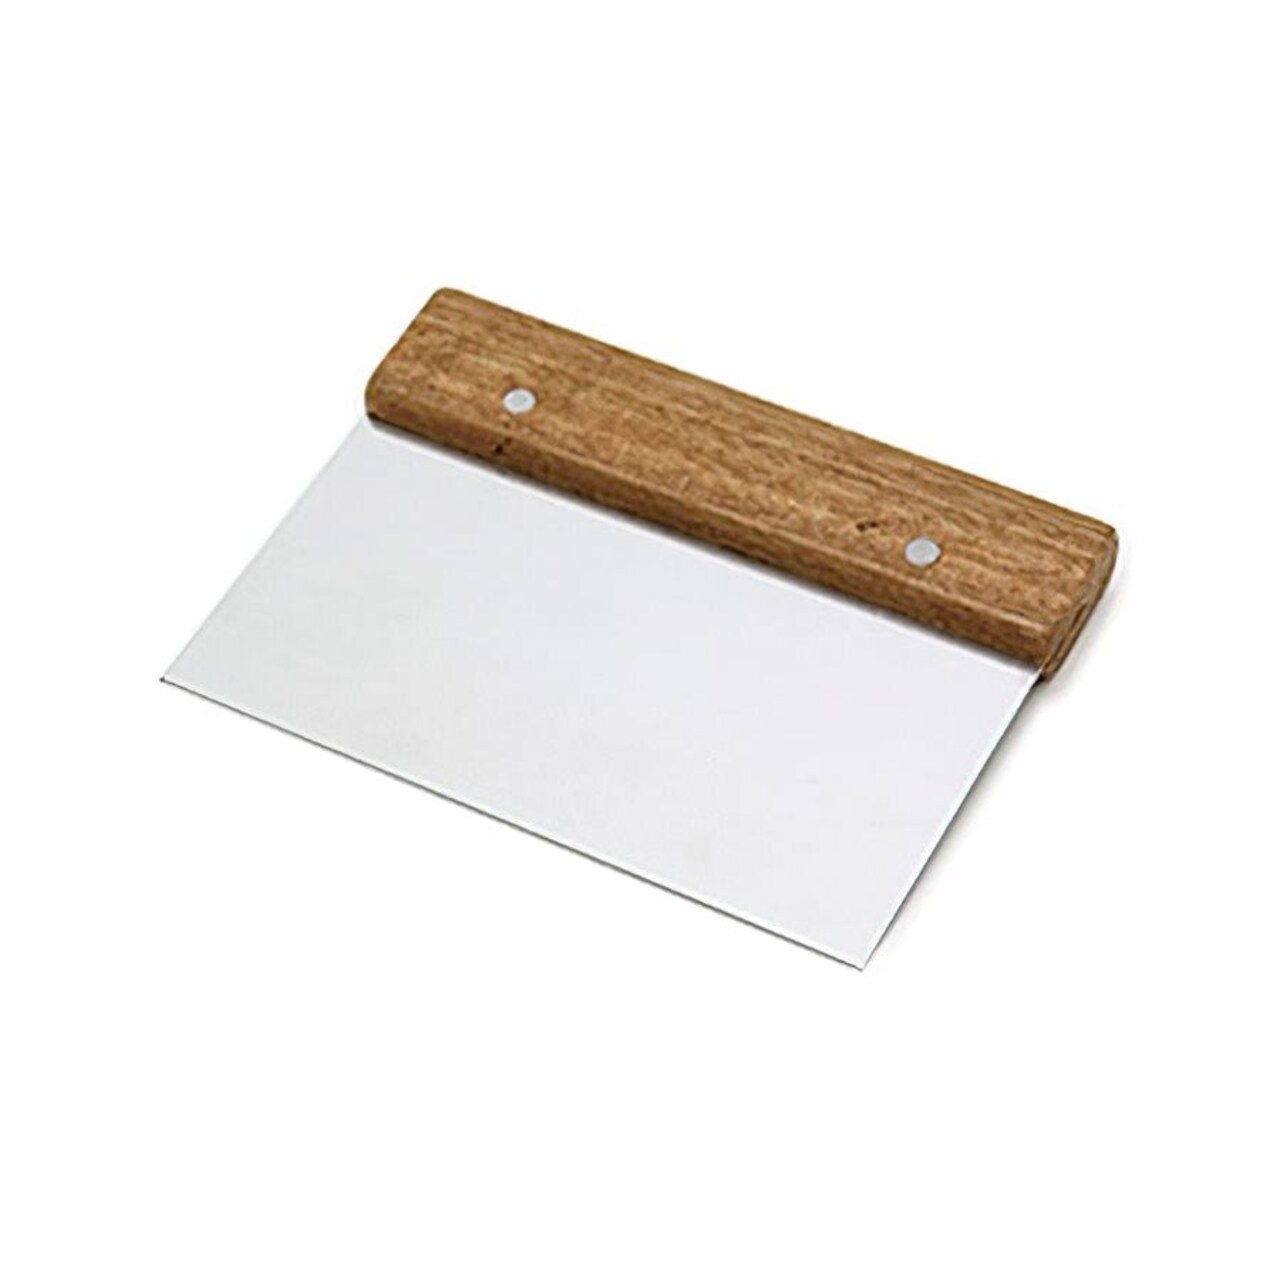 Bench Scraper 4X6 Inch, Stainless Steel with Wood Handle